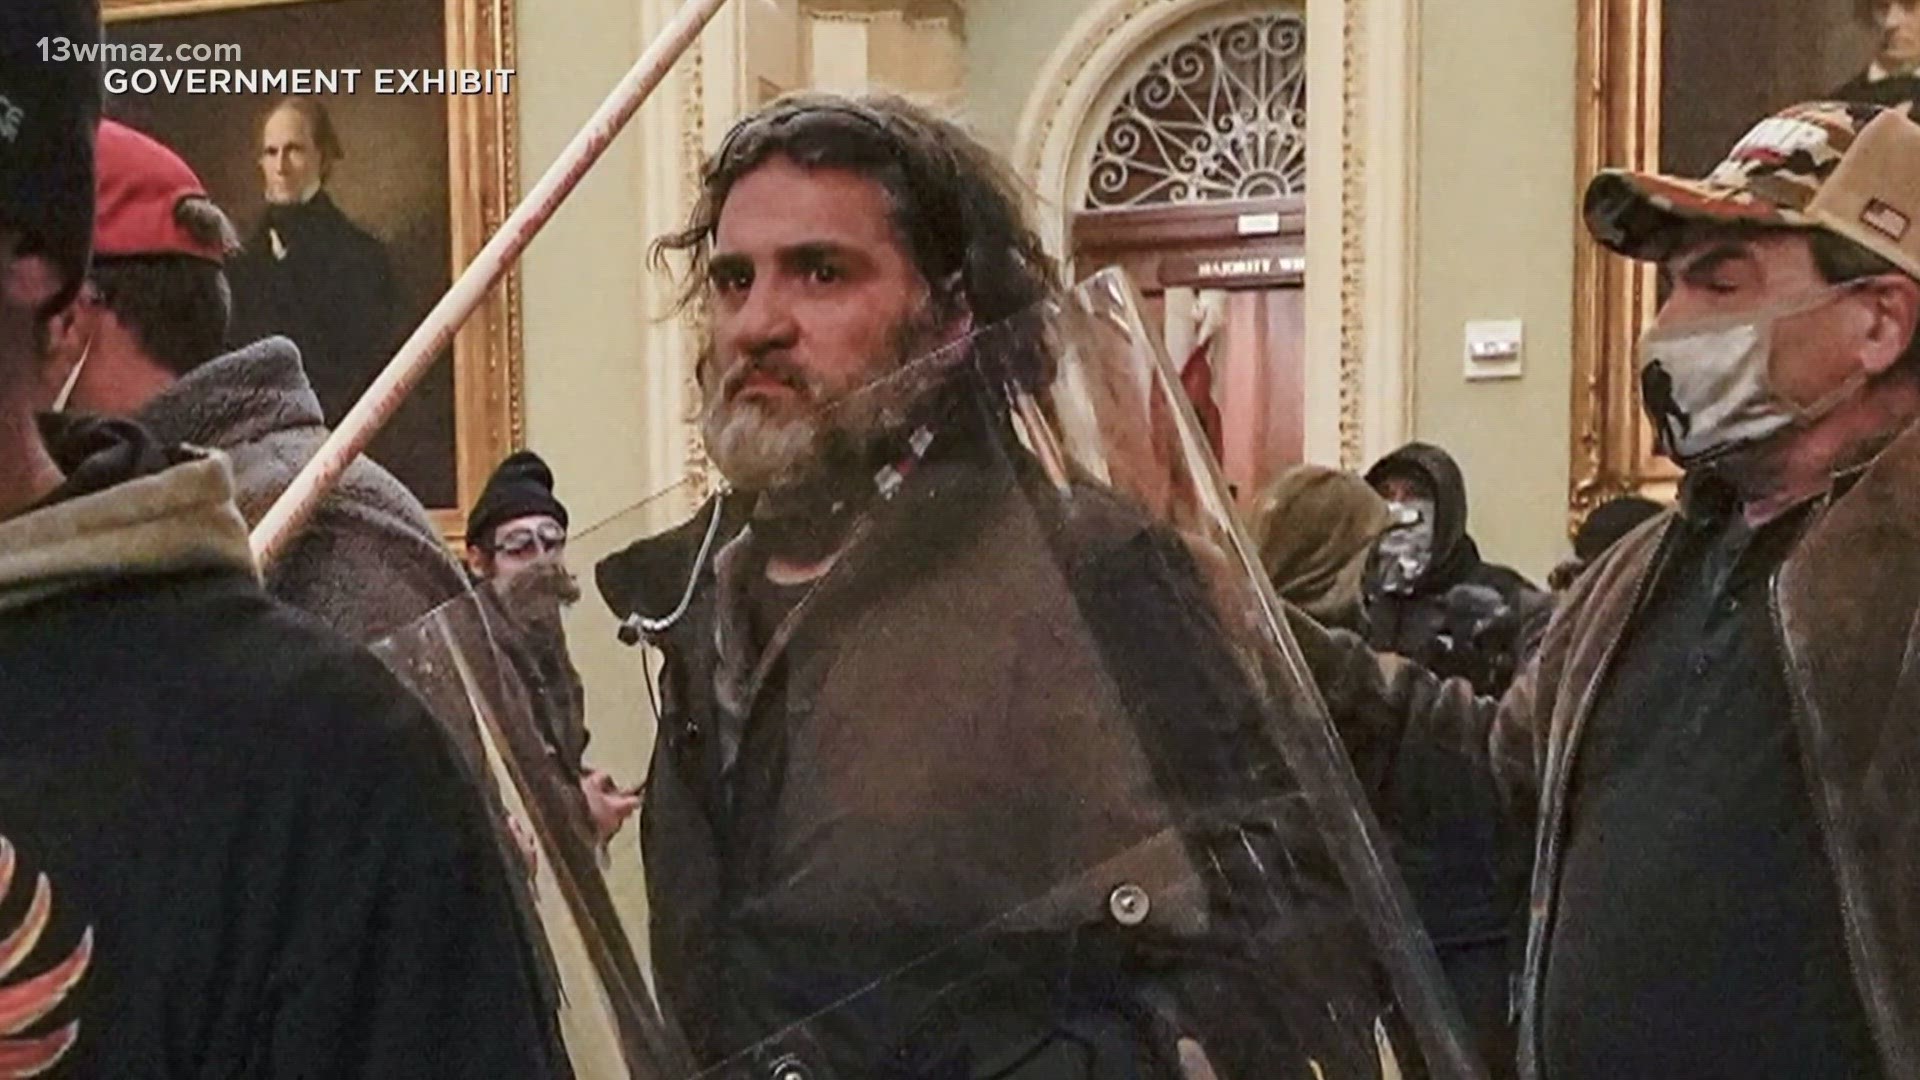 Ethan Nordean, one of the members of the "Proud Boys" convicted of seditious conspiracy in the Jan. 6 riot, was sentenced Friday in a Washington, D.C. federal court.